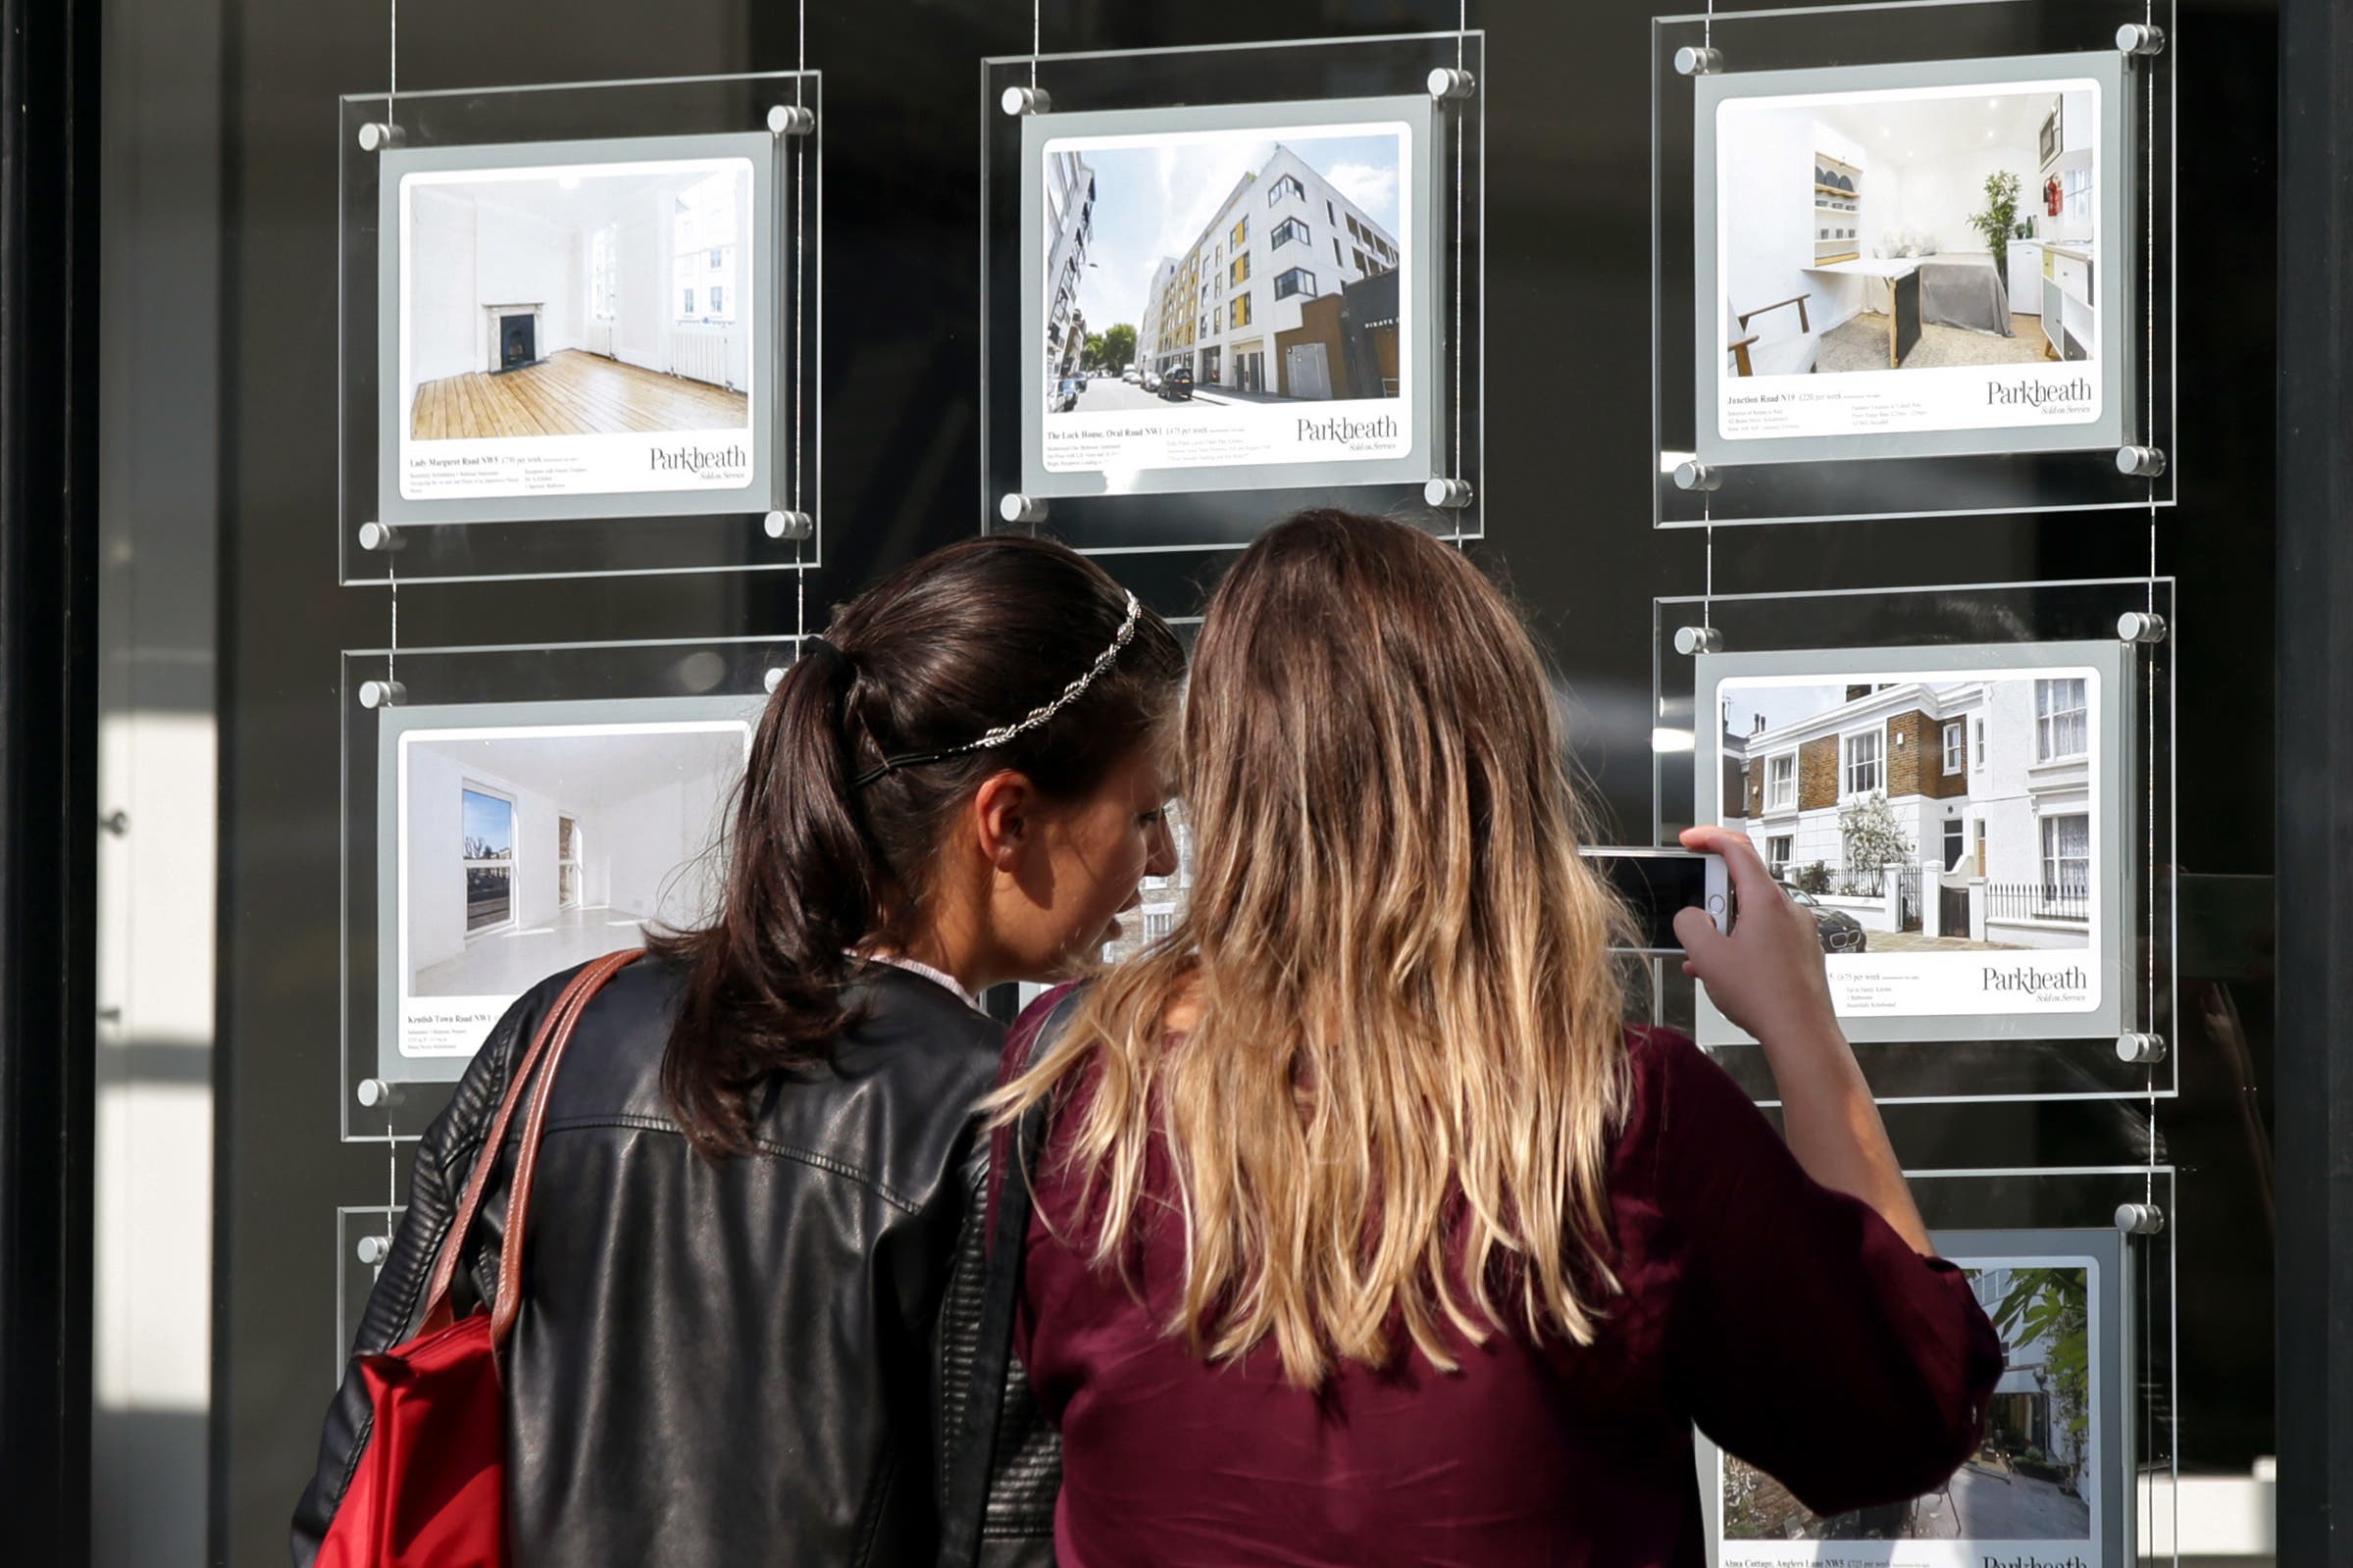 The average UK house price reached a record high of £296,000 in August after jumping by £36,000 annually, according to official figures (Yui Mok/PA)